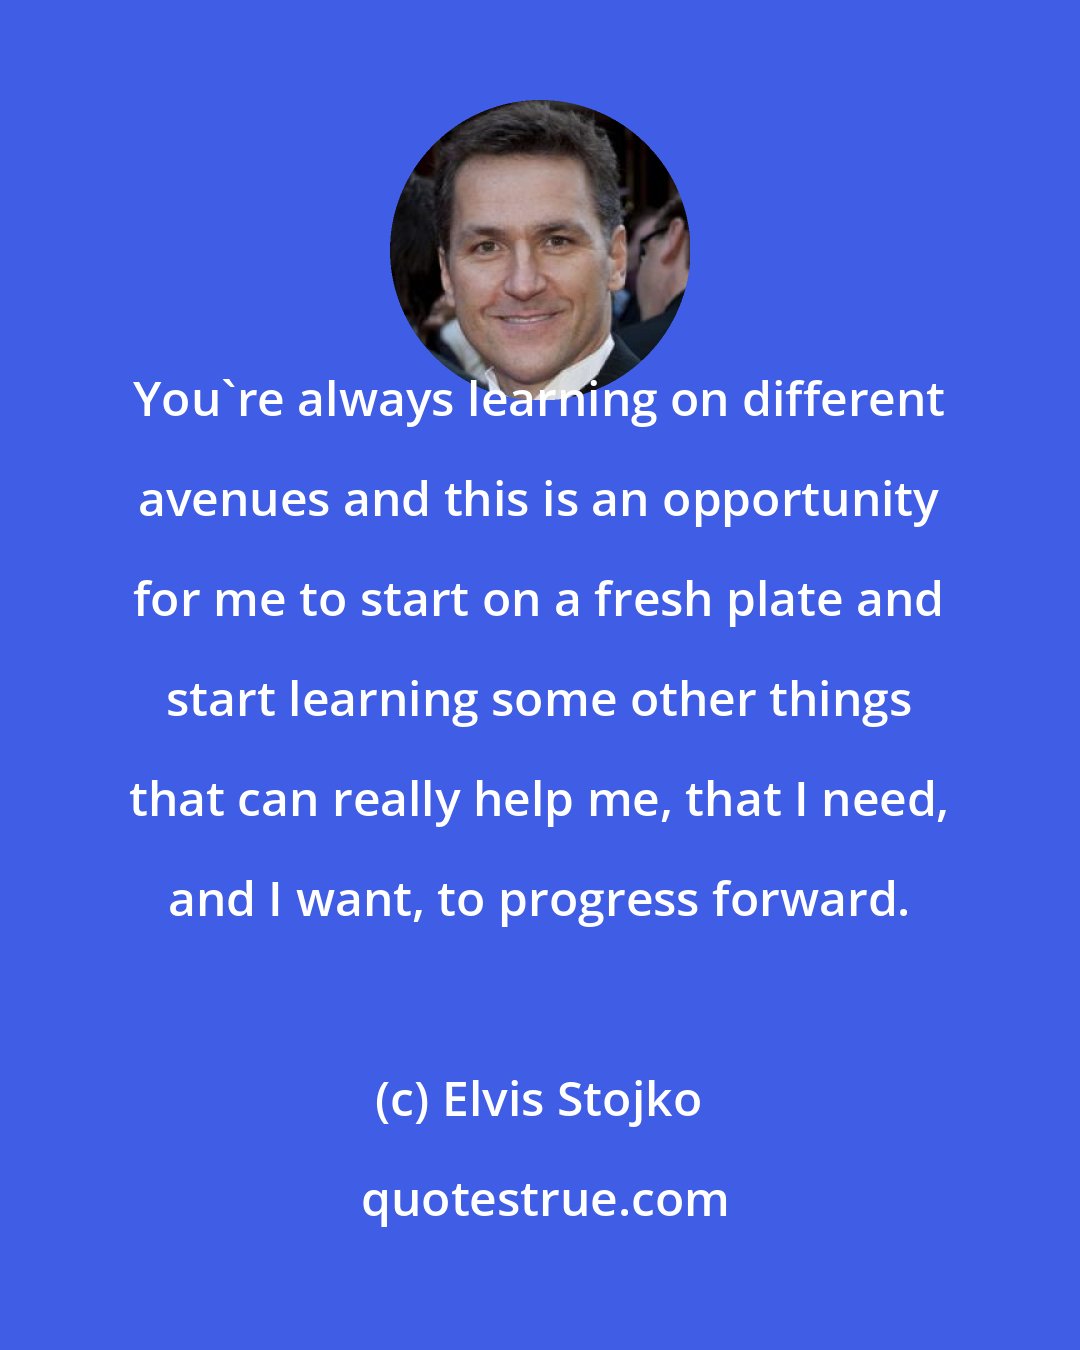 Elvis Stojko: You're always learning on different avenues and this is an opportunity for me to start on a fresh plate and start learning some other things that can really help me, that I need, and I want, to progress forward.